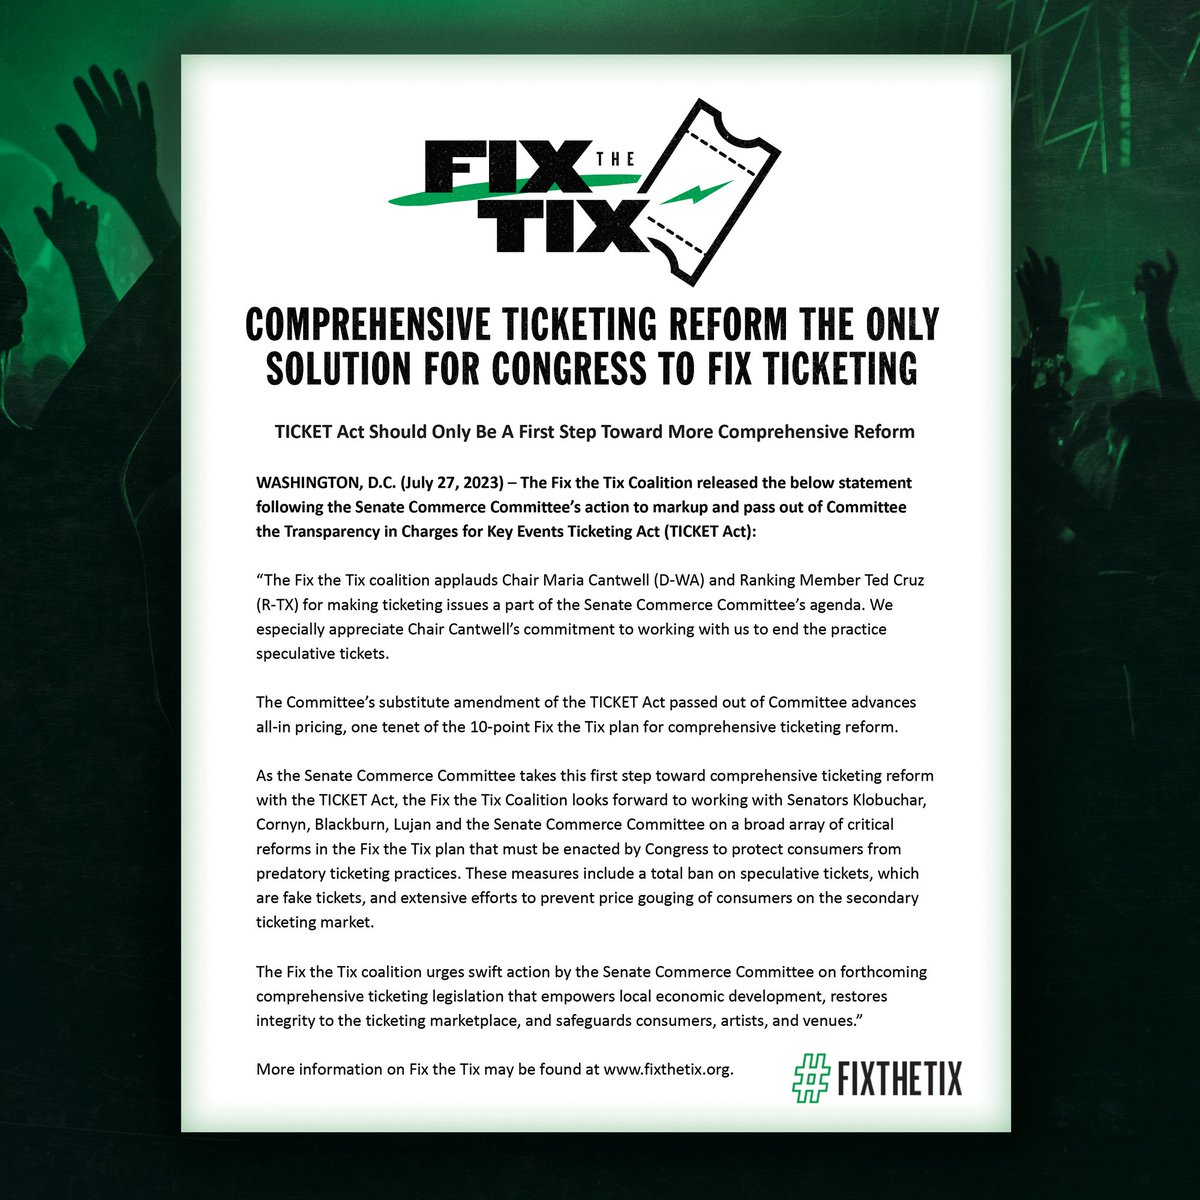 Today, the #FixTheTix Coalition released a statement following the Senate Commerce Committee’s action to markup and pass out of Committee the Transparency in Charges for Key Events Ticketing Act (TICKET Act).